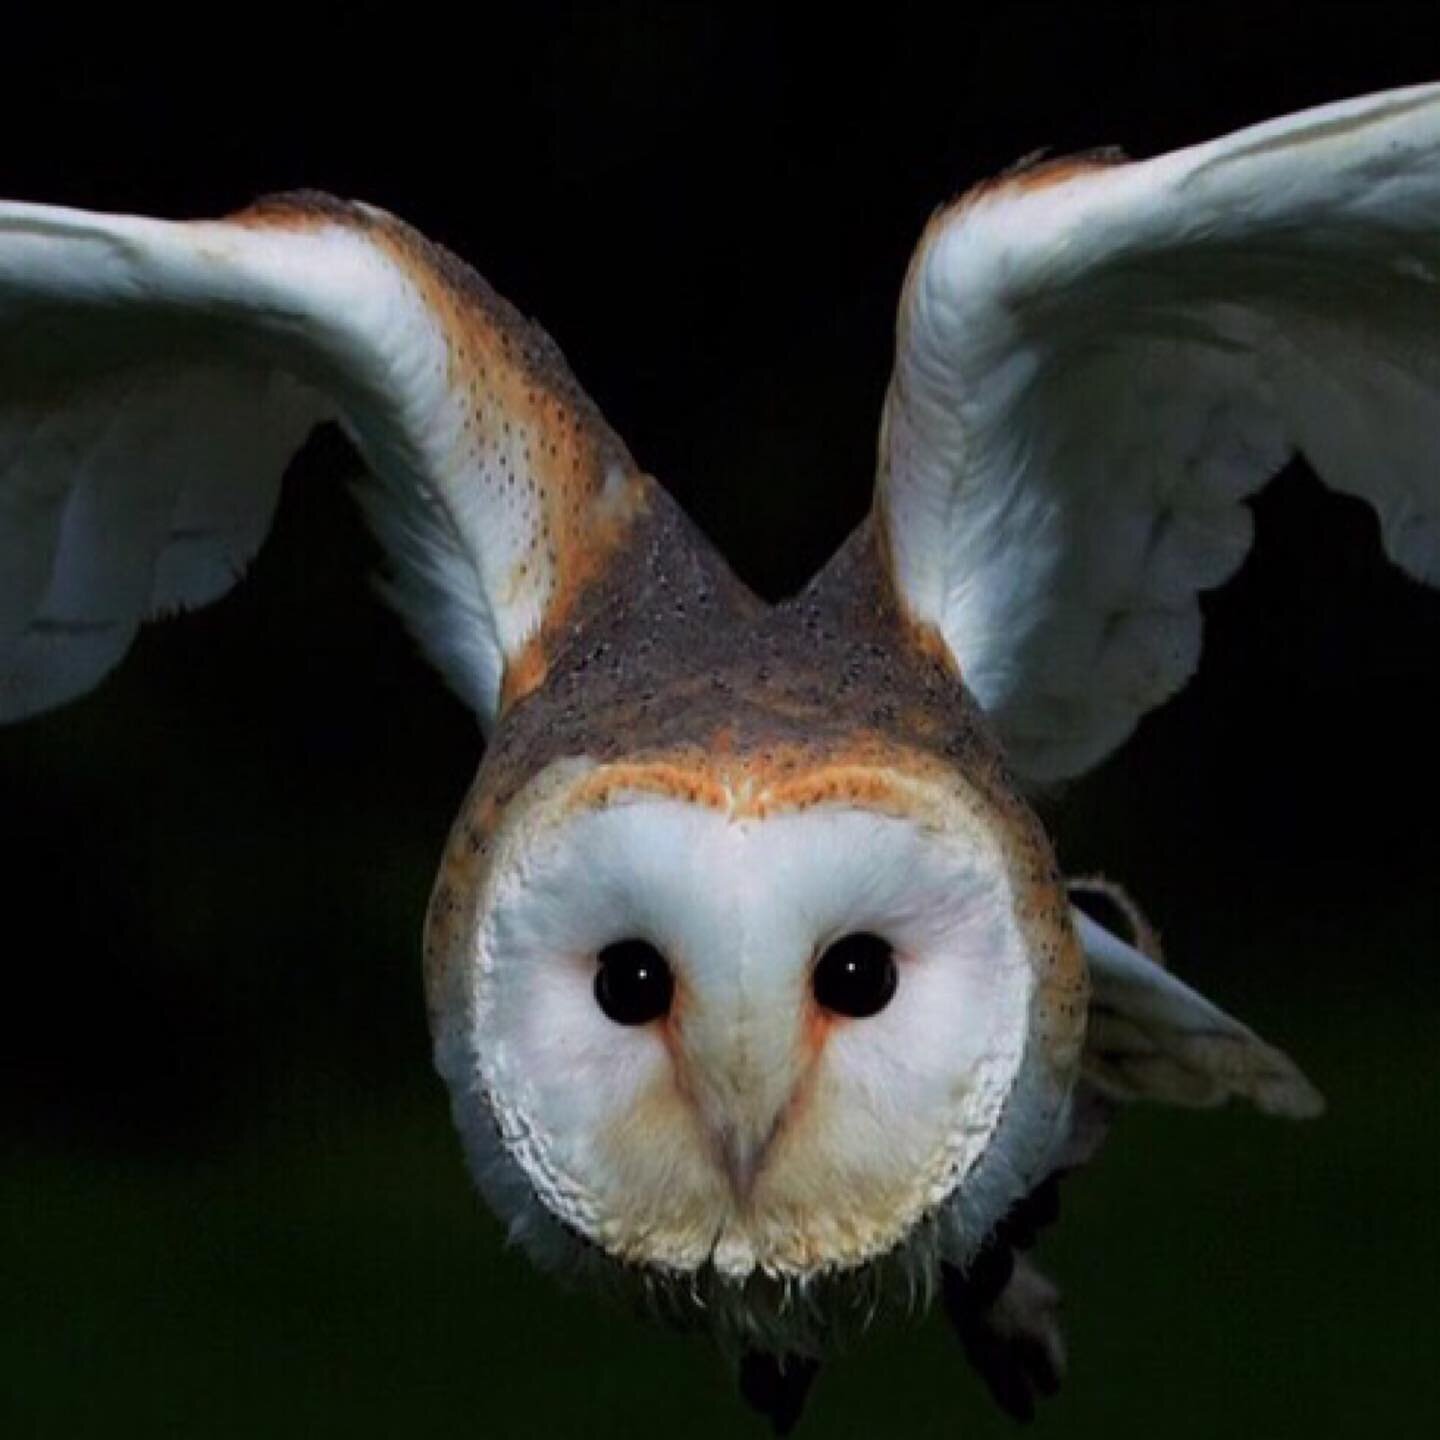 While owls are sacred to the Greek Goddess Athena, gifted with intelligence, military strategy and generalship, barn owls are sacred to her brother, Ares, the Greek God of the untamed aspects of war, bloodshed and strife.
⠀⠀⠀⠀⠀⠀⠀⠀⠀⠀⠀⠀
⠀⠀⠀⠀⠀⠀⠀⠀⠀⠀⠀⠀ ⠀⠀